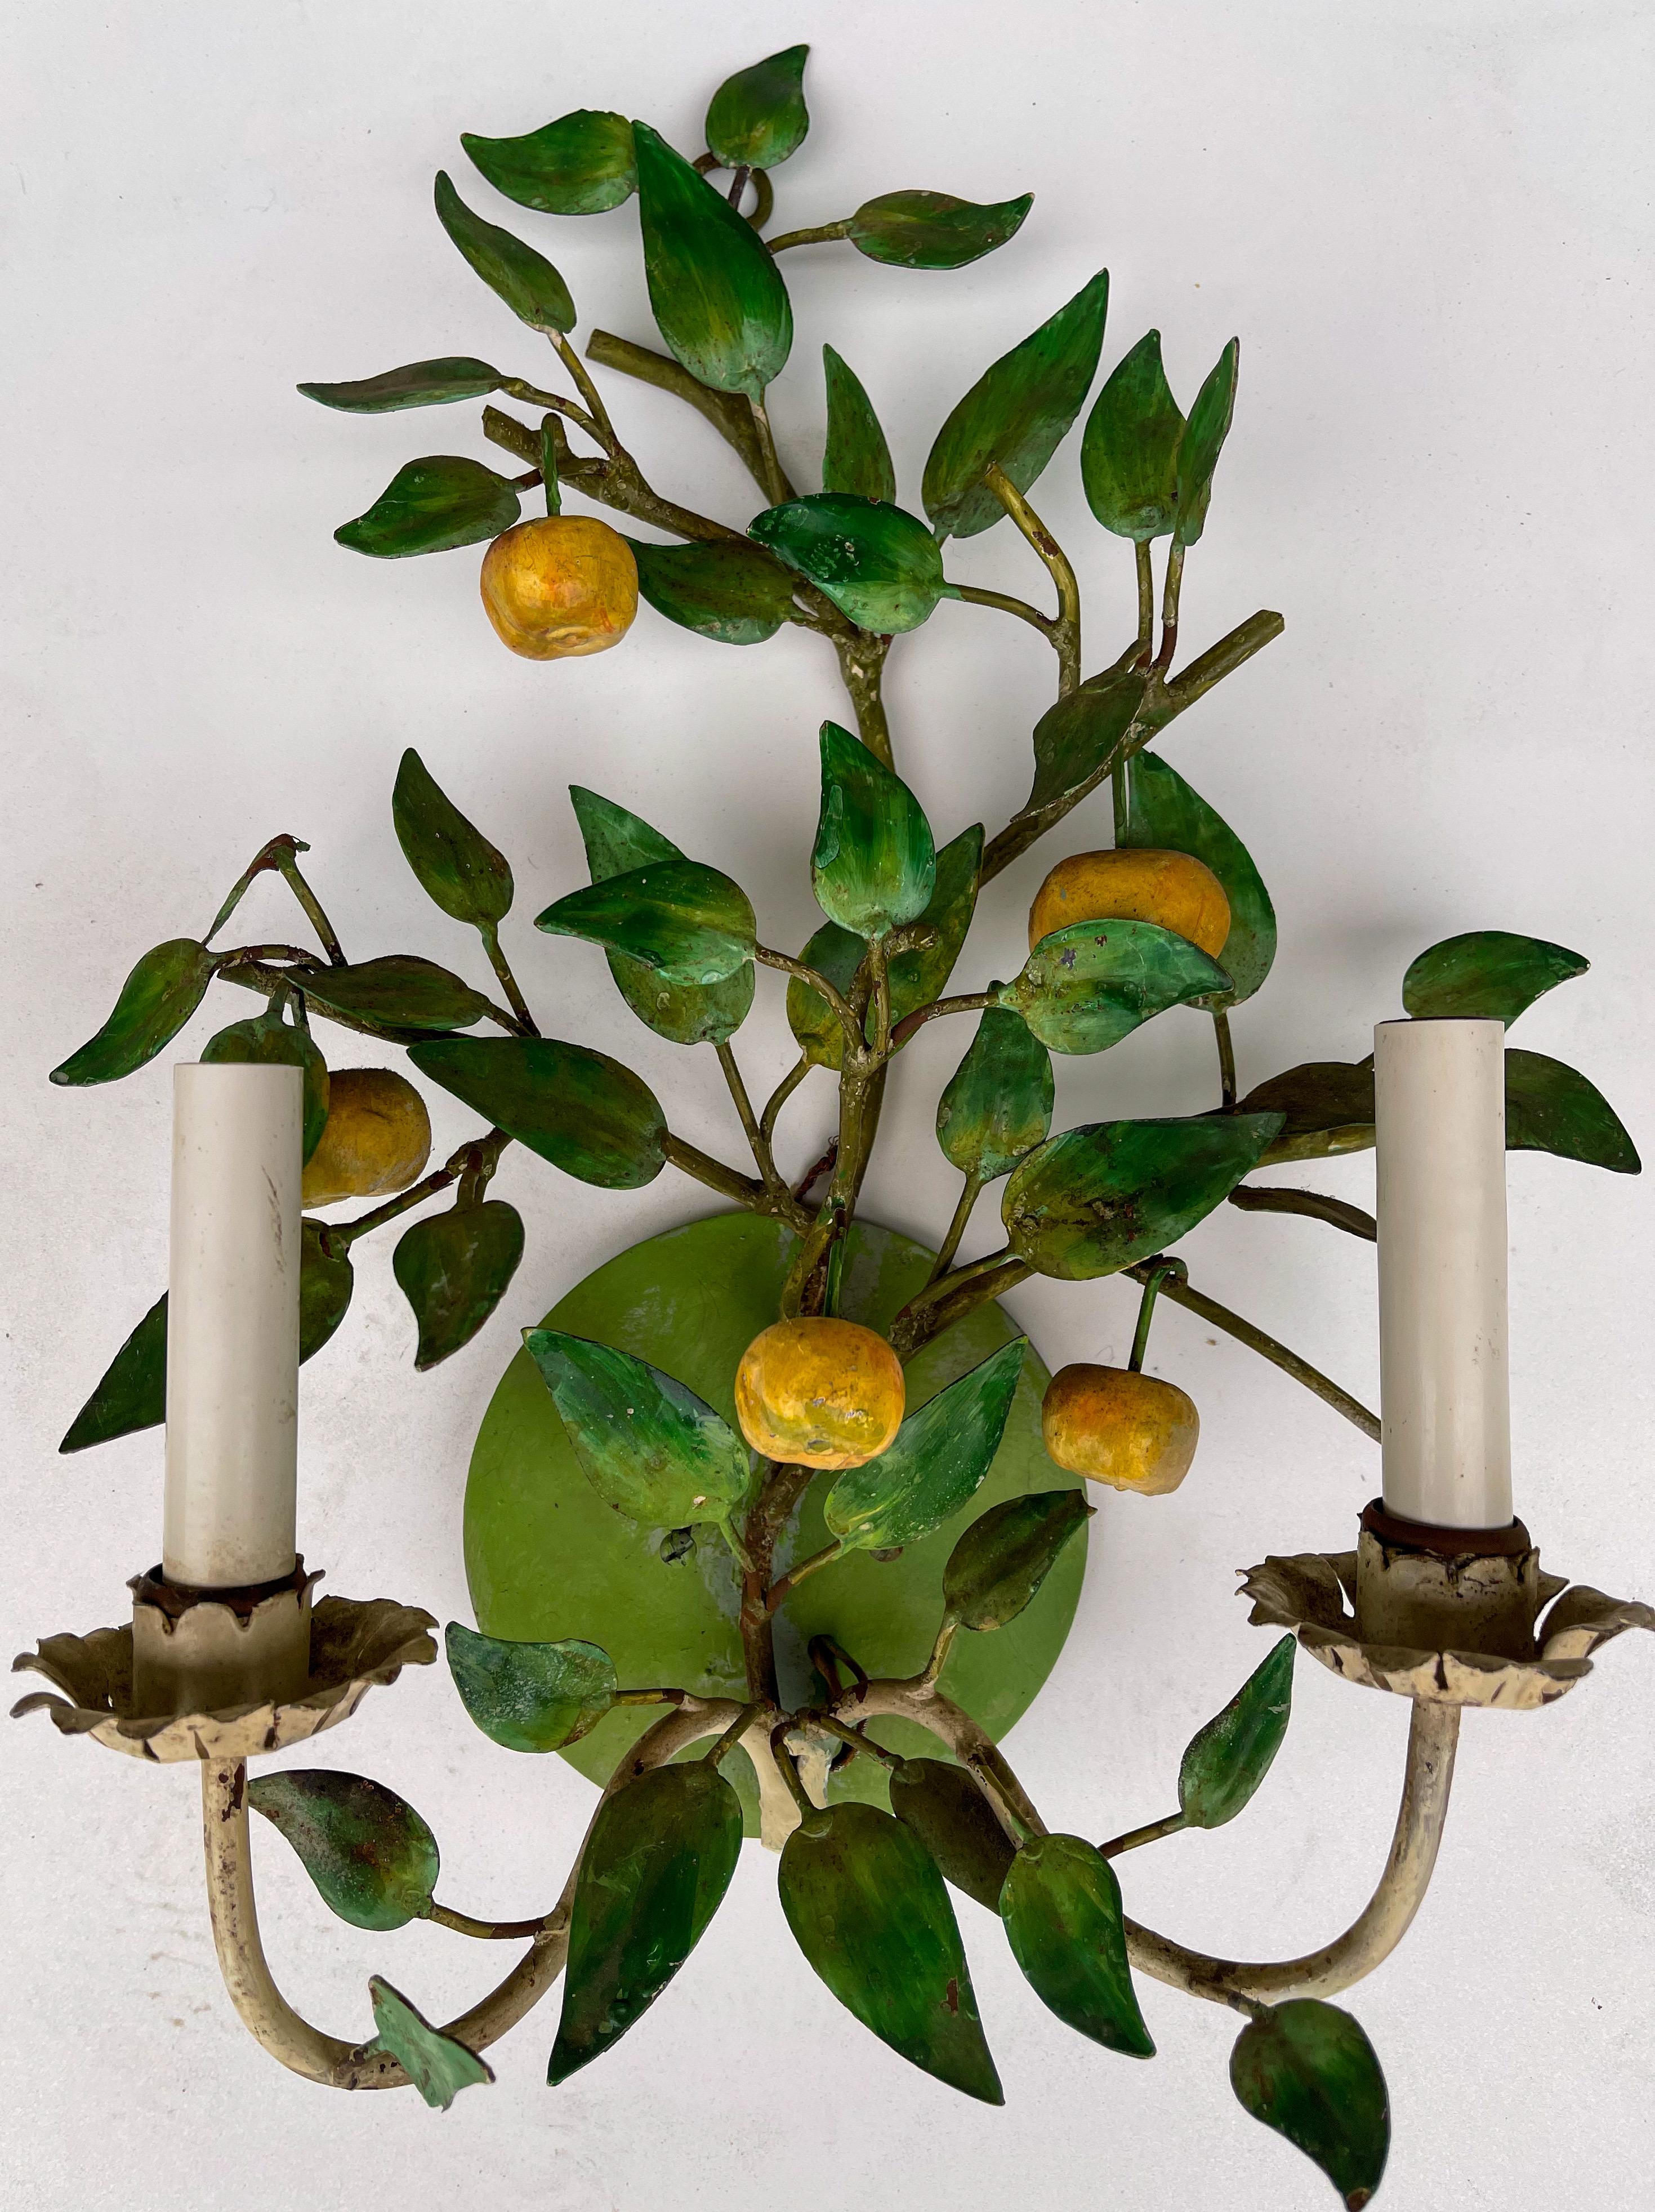 This is a set of Italian toleware fruit and foliate sconces. They are electrified. The yellow fruit appears to be an apple. They do show some age wear to the paint.